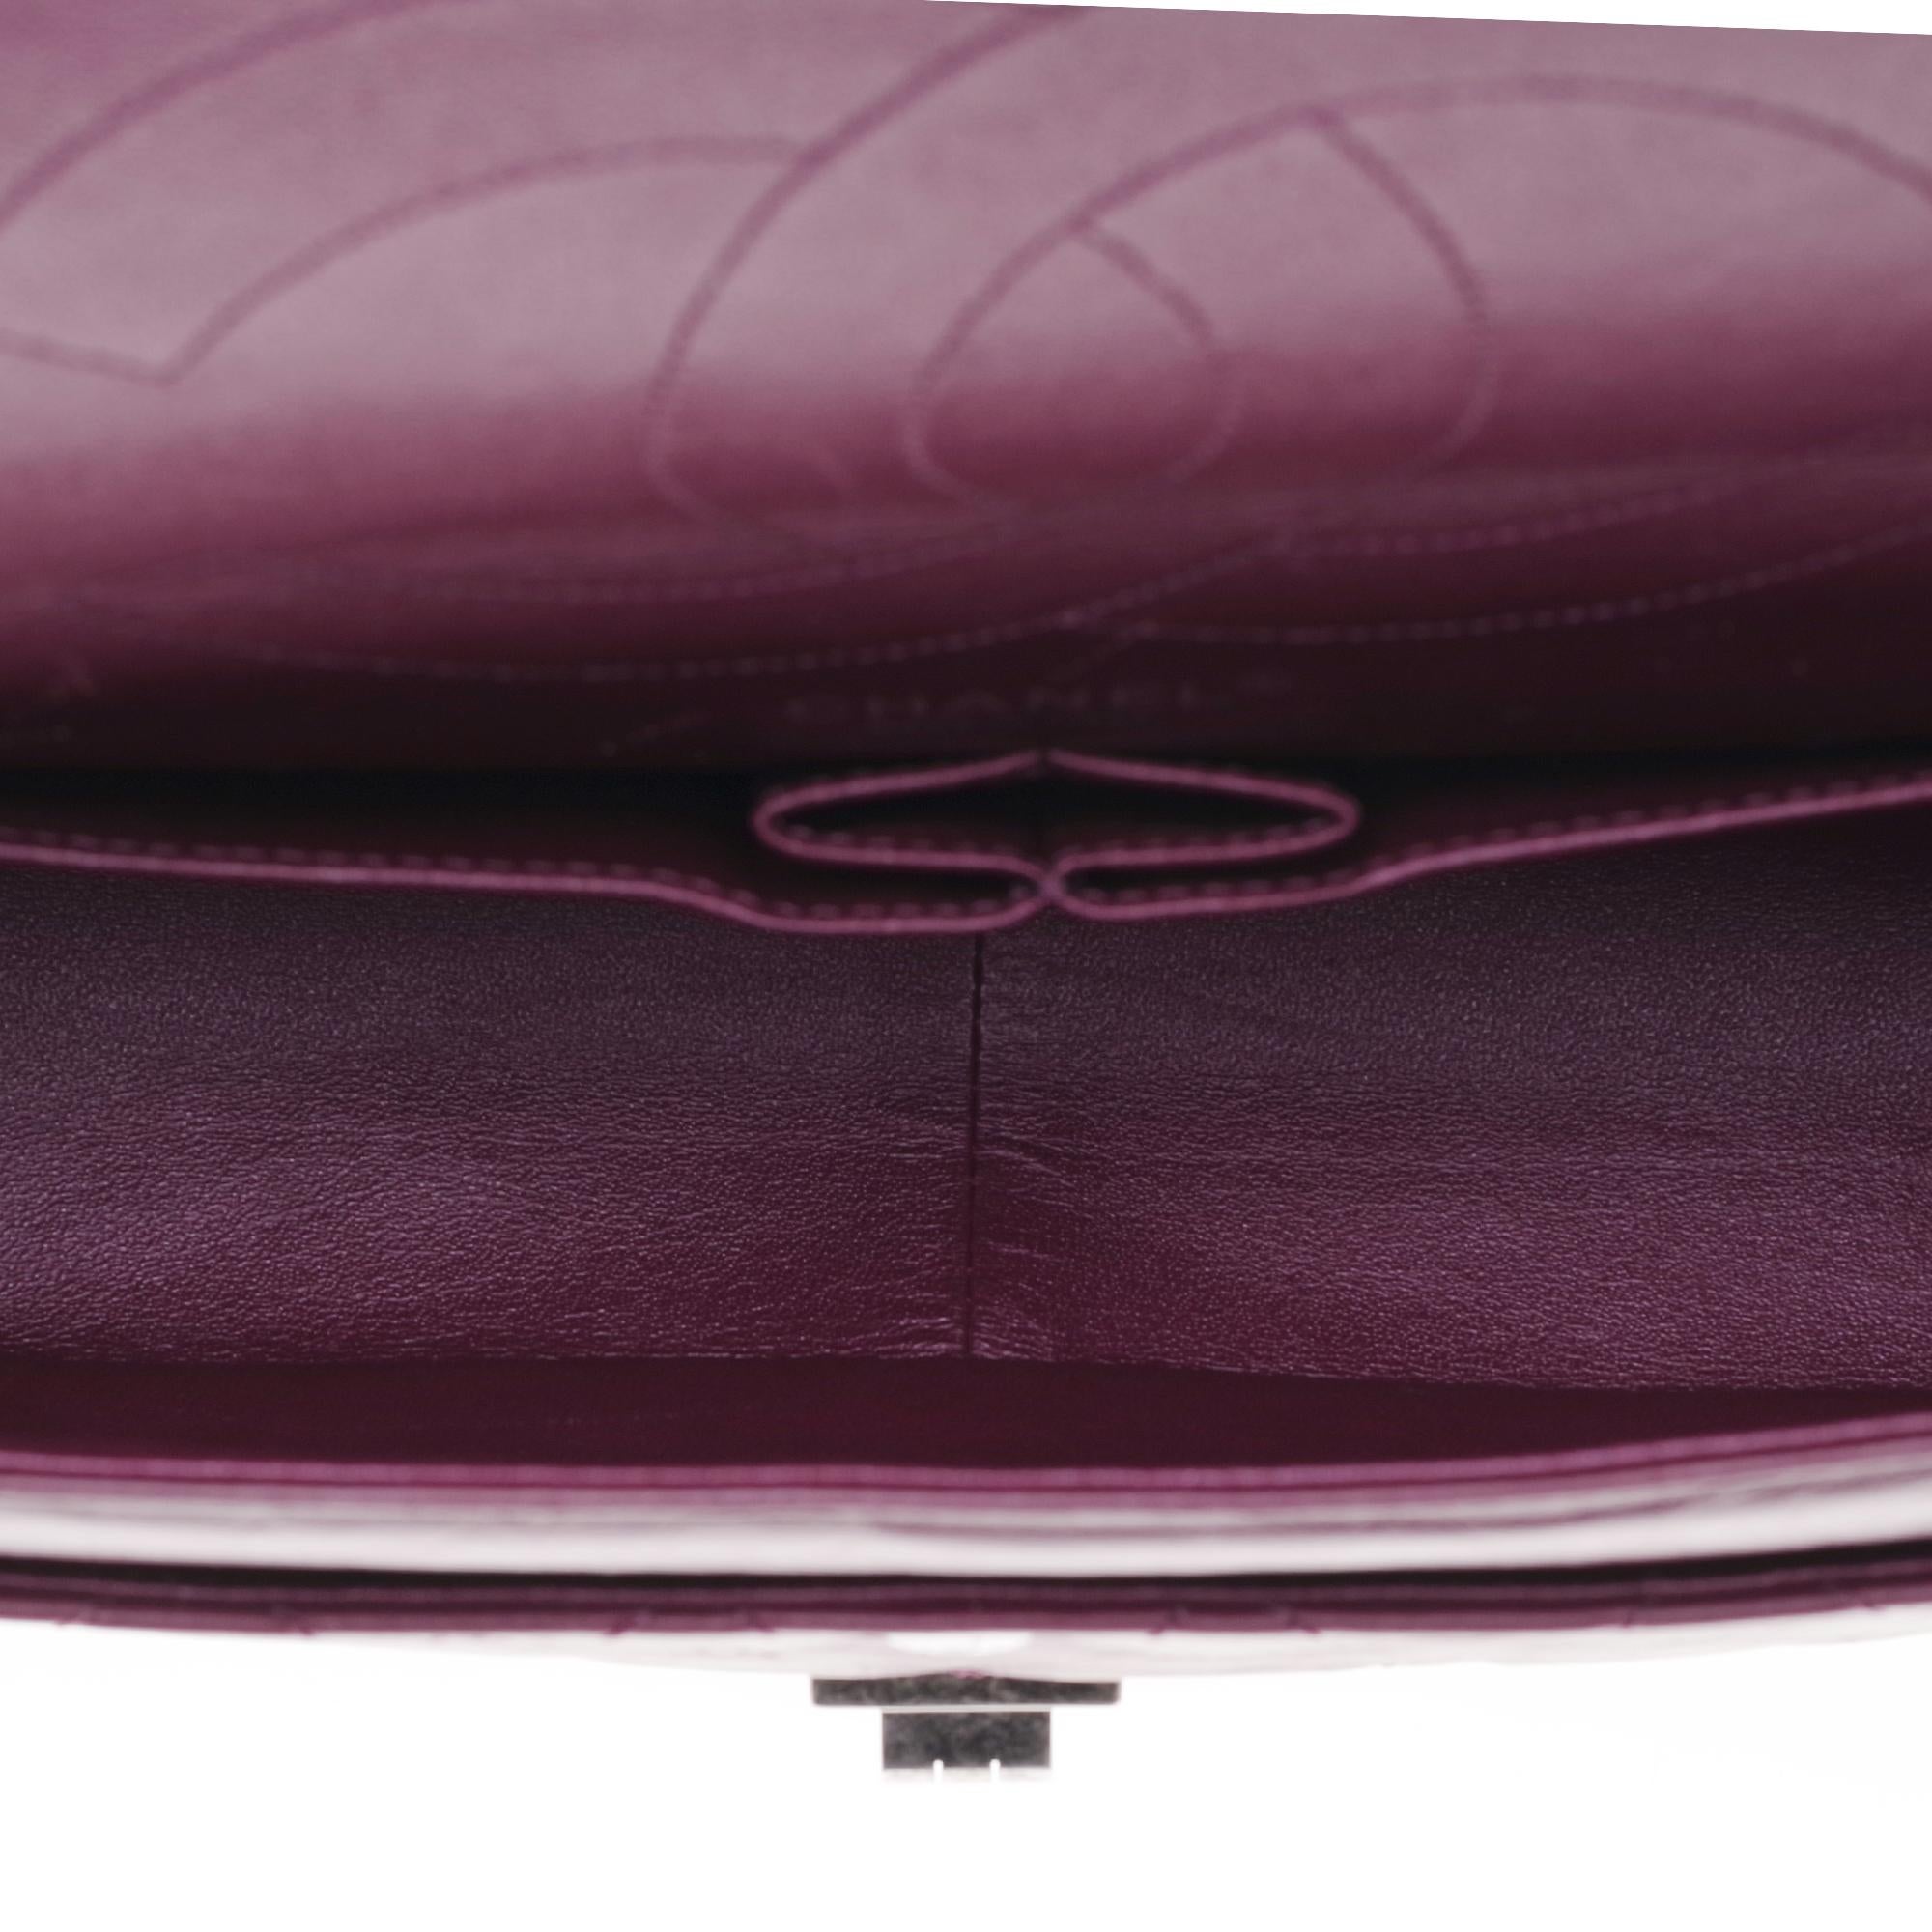 Amazing Chanel 2.55 Reissue handbag in plum quilted leather 4